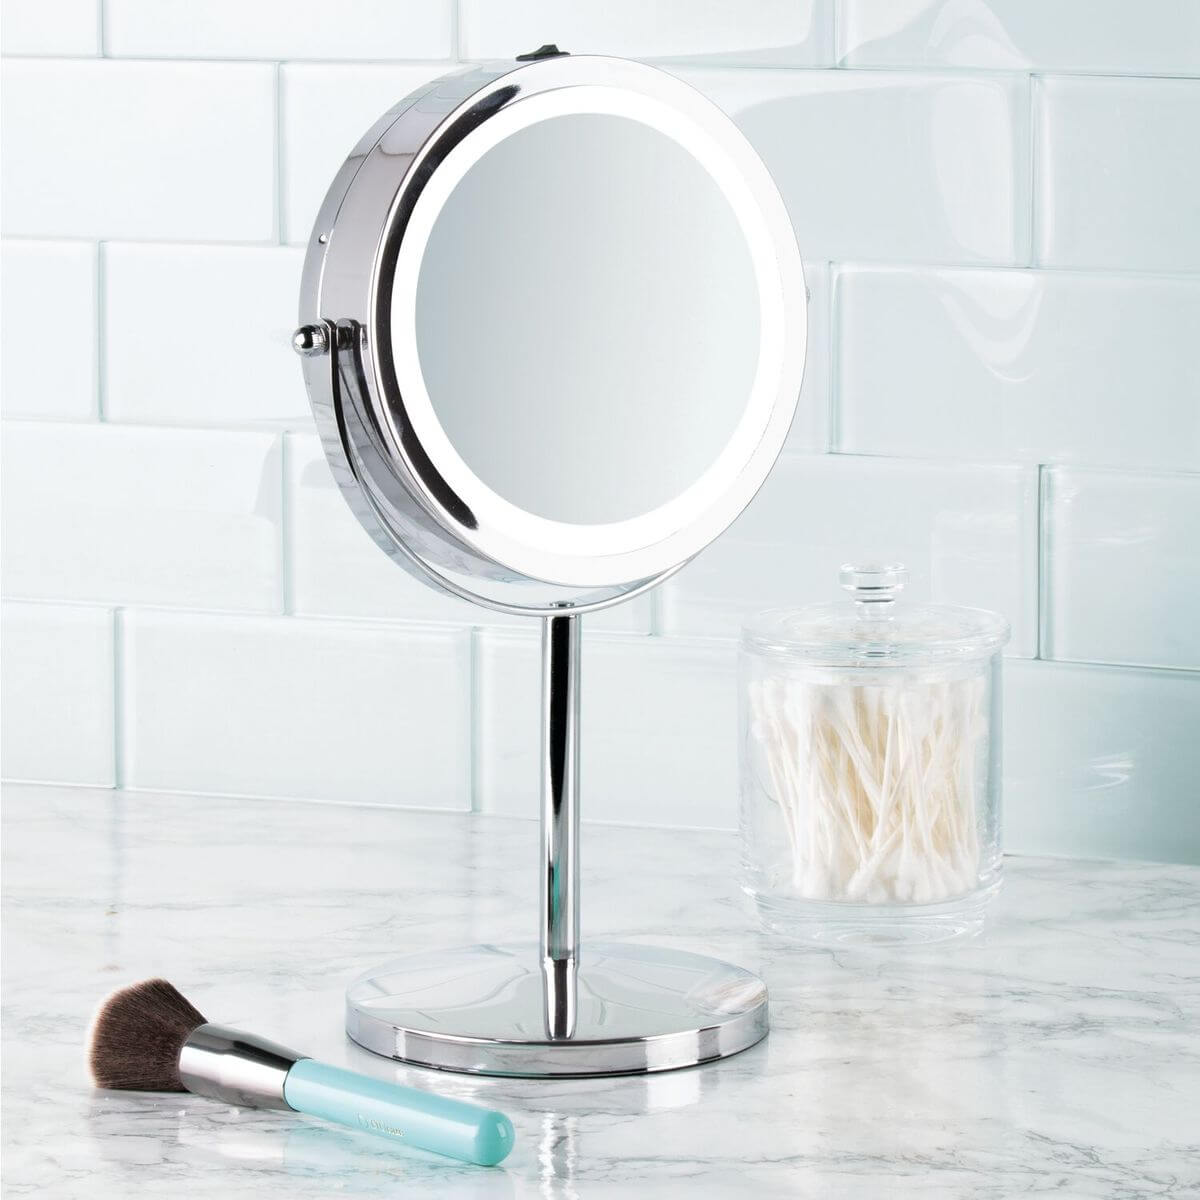 A stainless steel makeup mirror with LED light standing on a marble top bathroom vanity